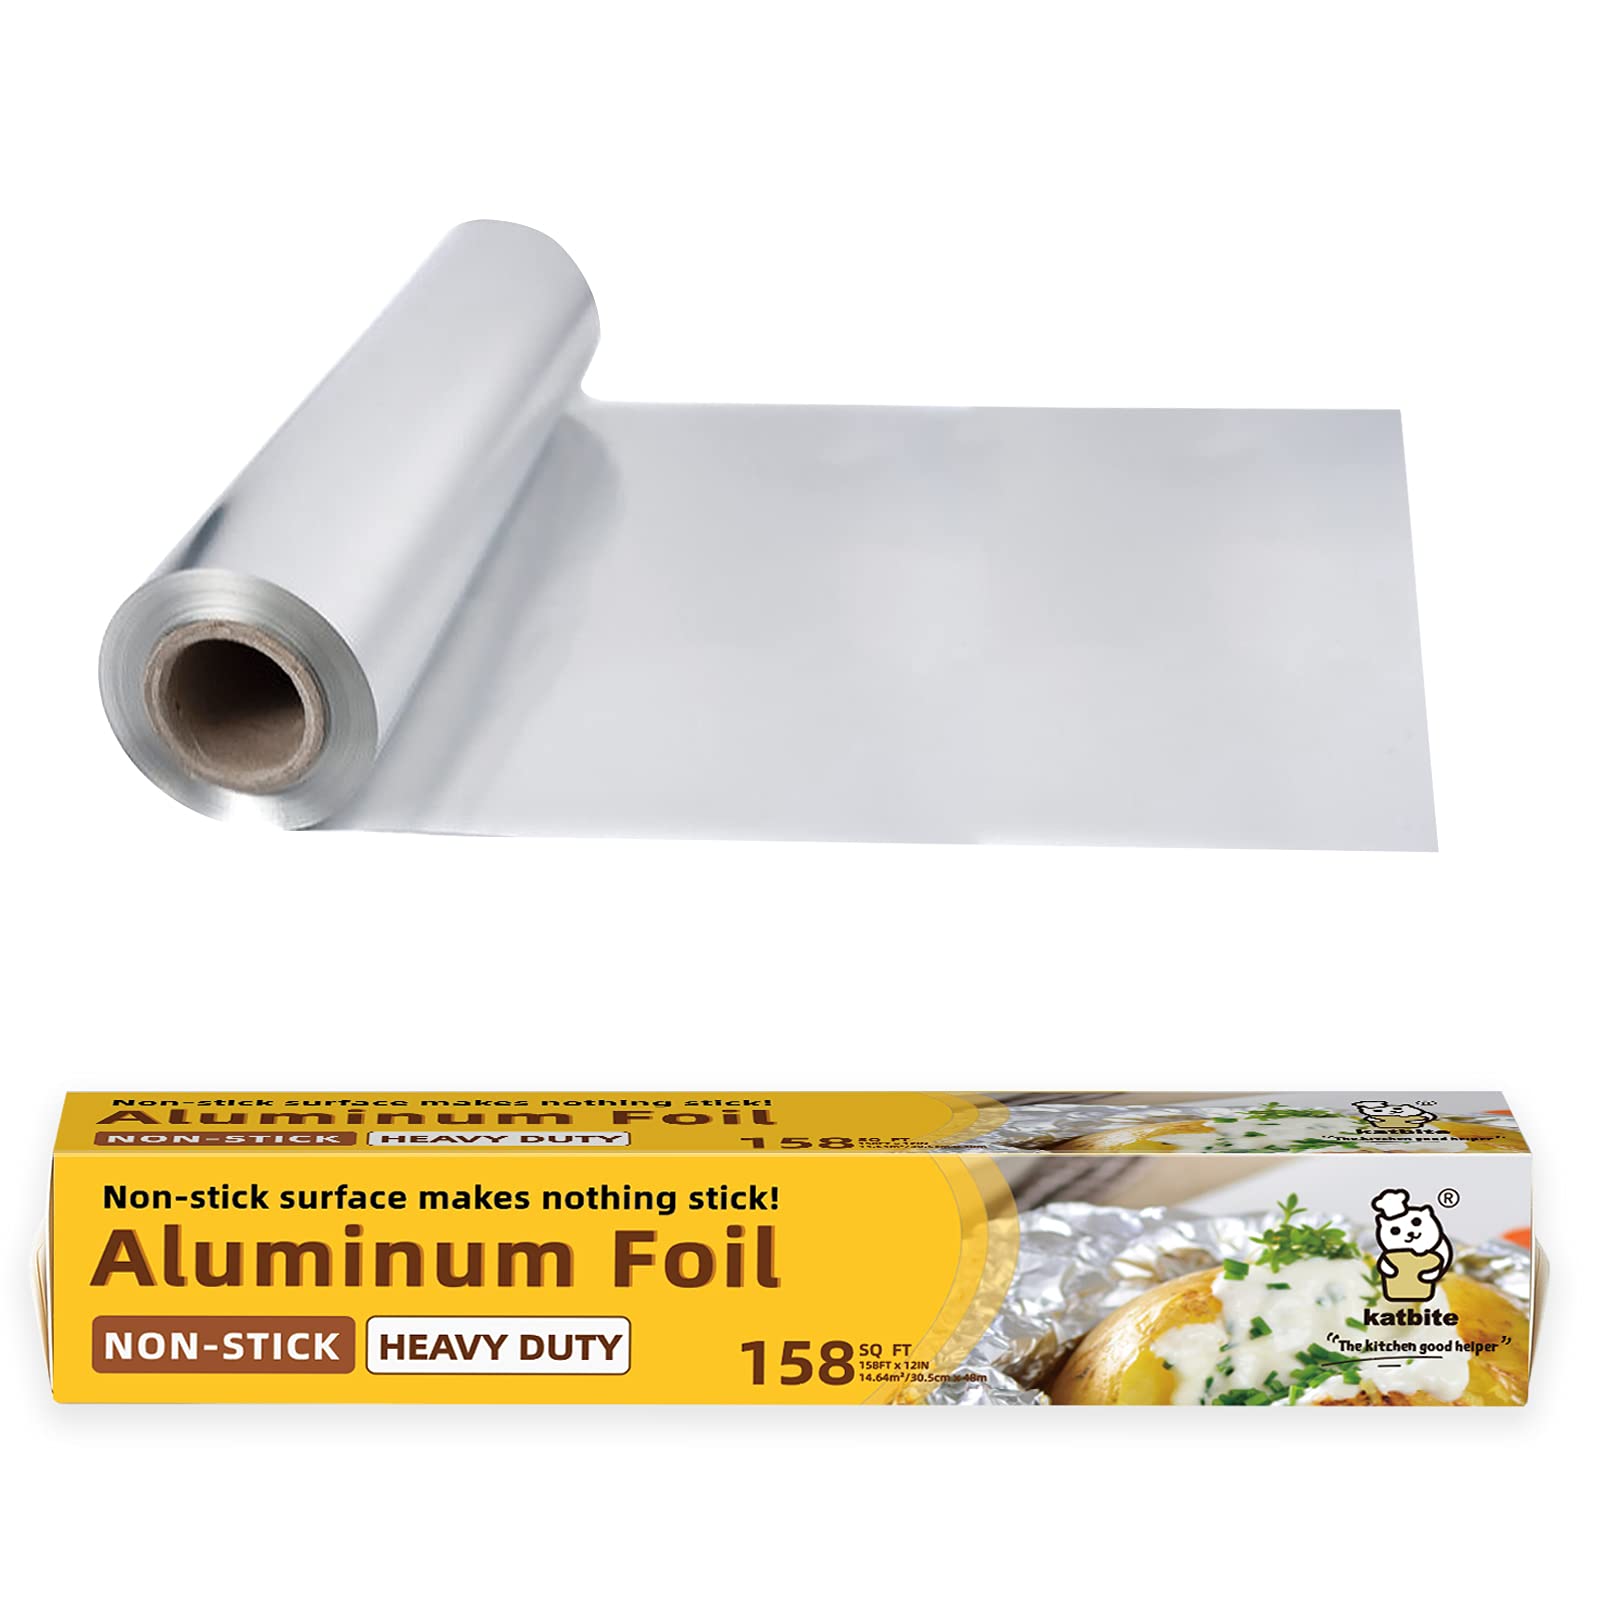 Abbey'sHome Shop Set of 2 Non Stick Foil Aluminum Roll- Refill- Baking- Standard Tin Sheet Cooking- Grill Foil, Silver, 12 Inches (ALF2)